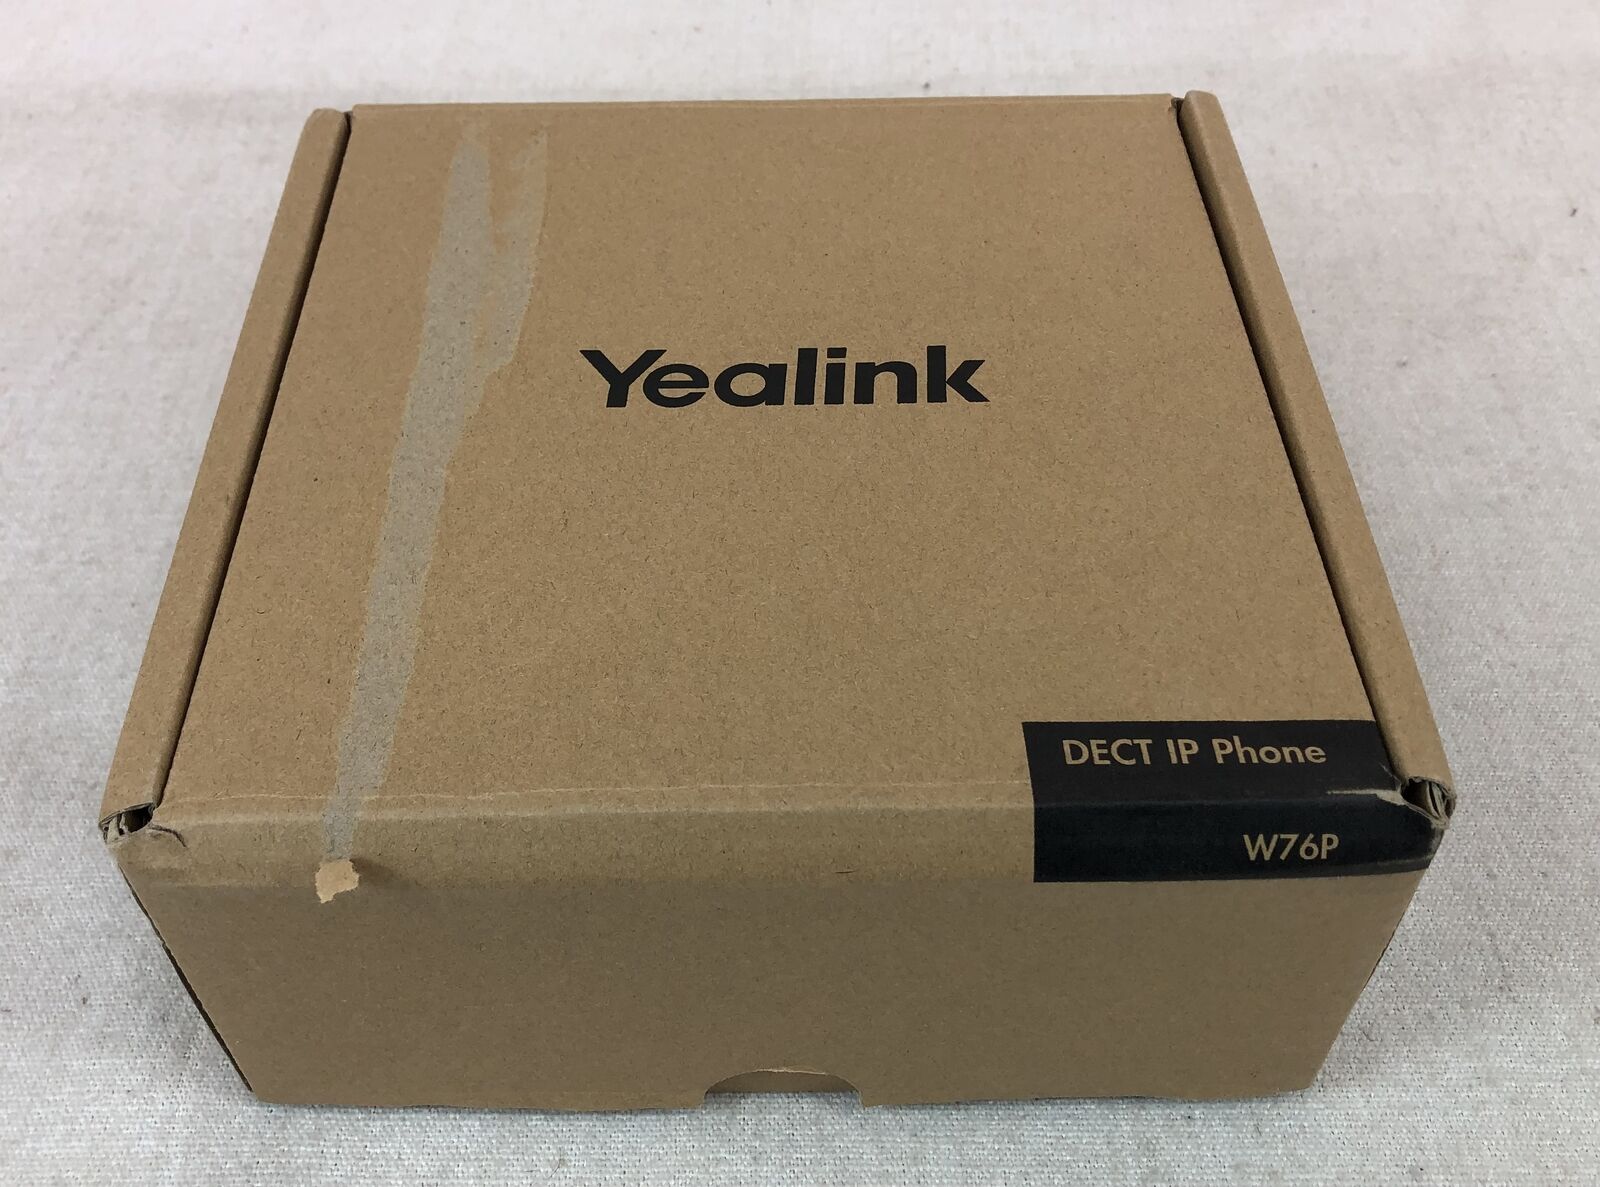 Yealink W76P DECT IP Phone, W70B & W56H, In factory box